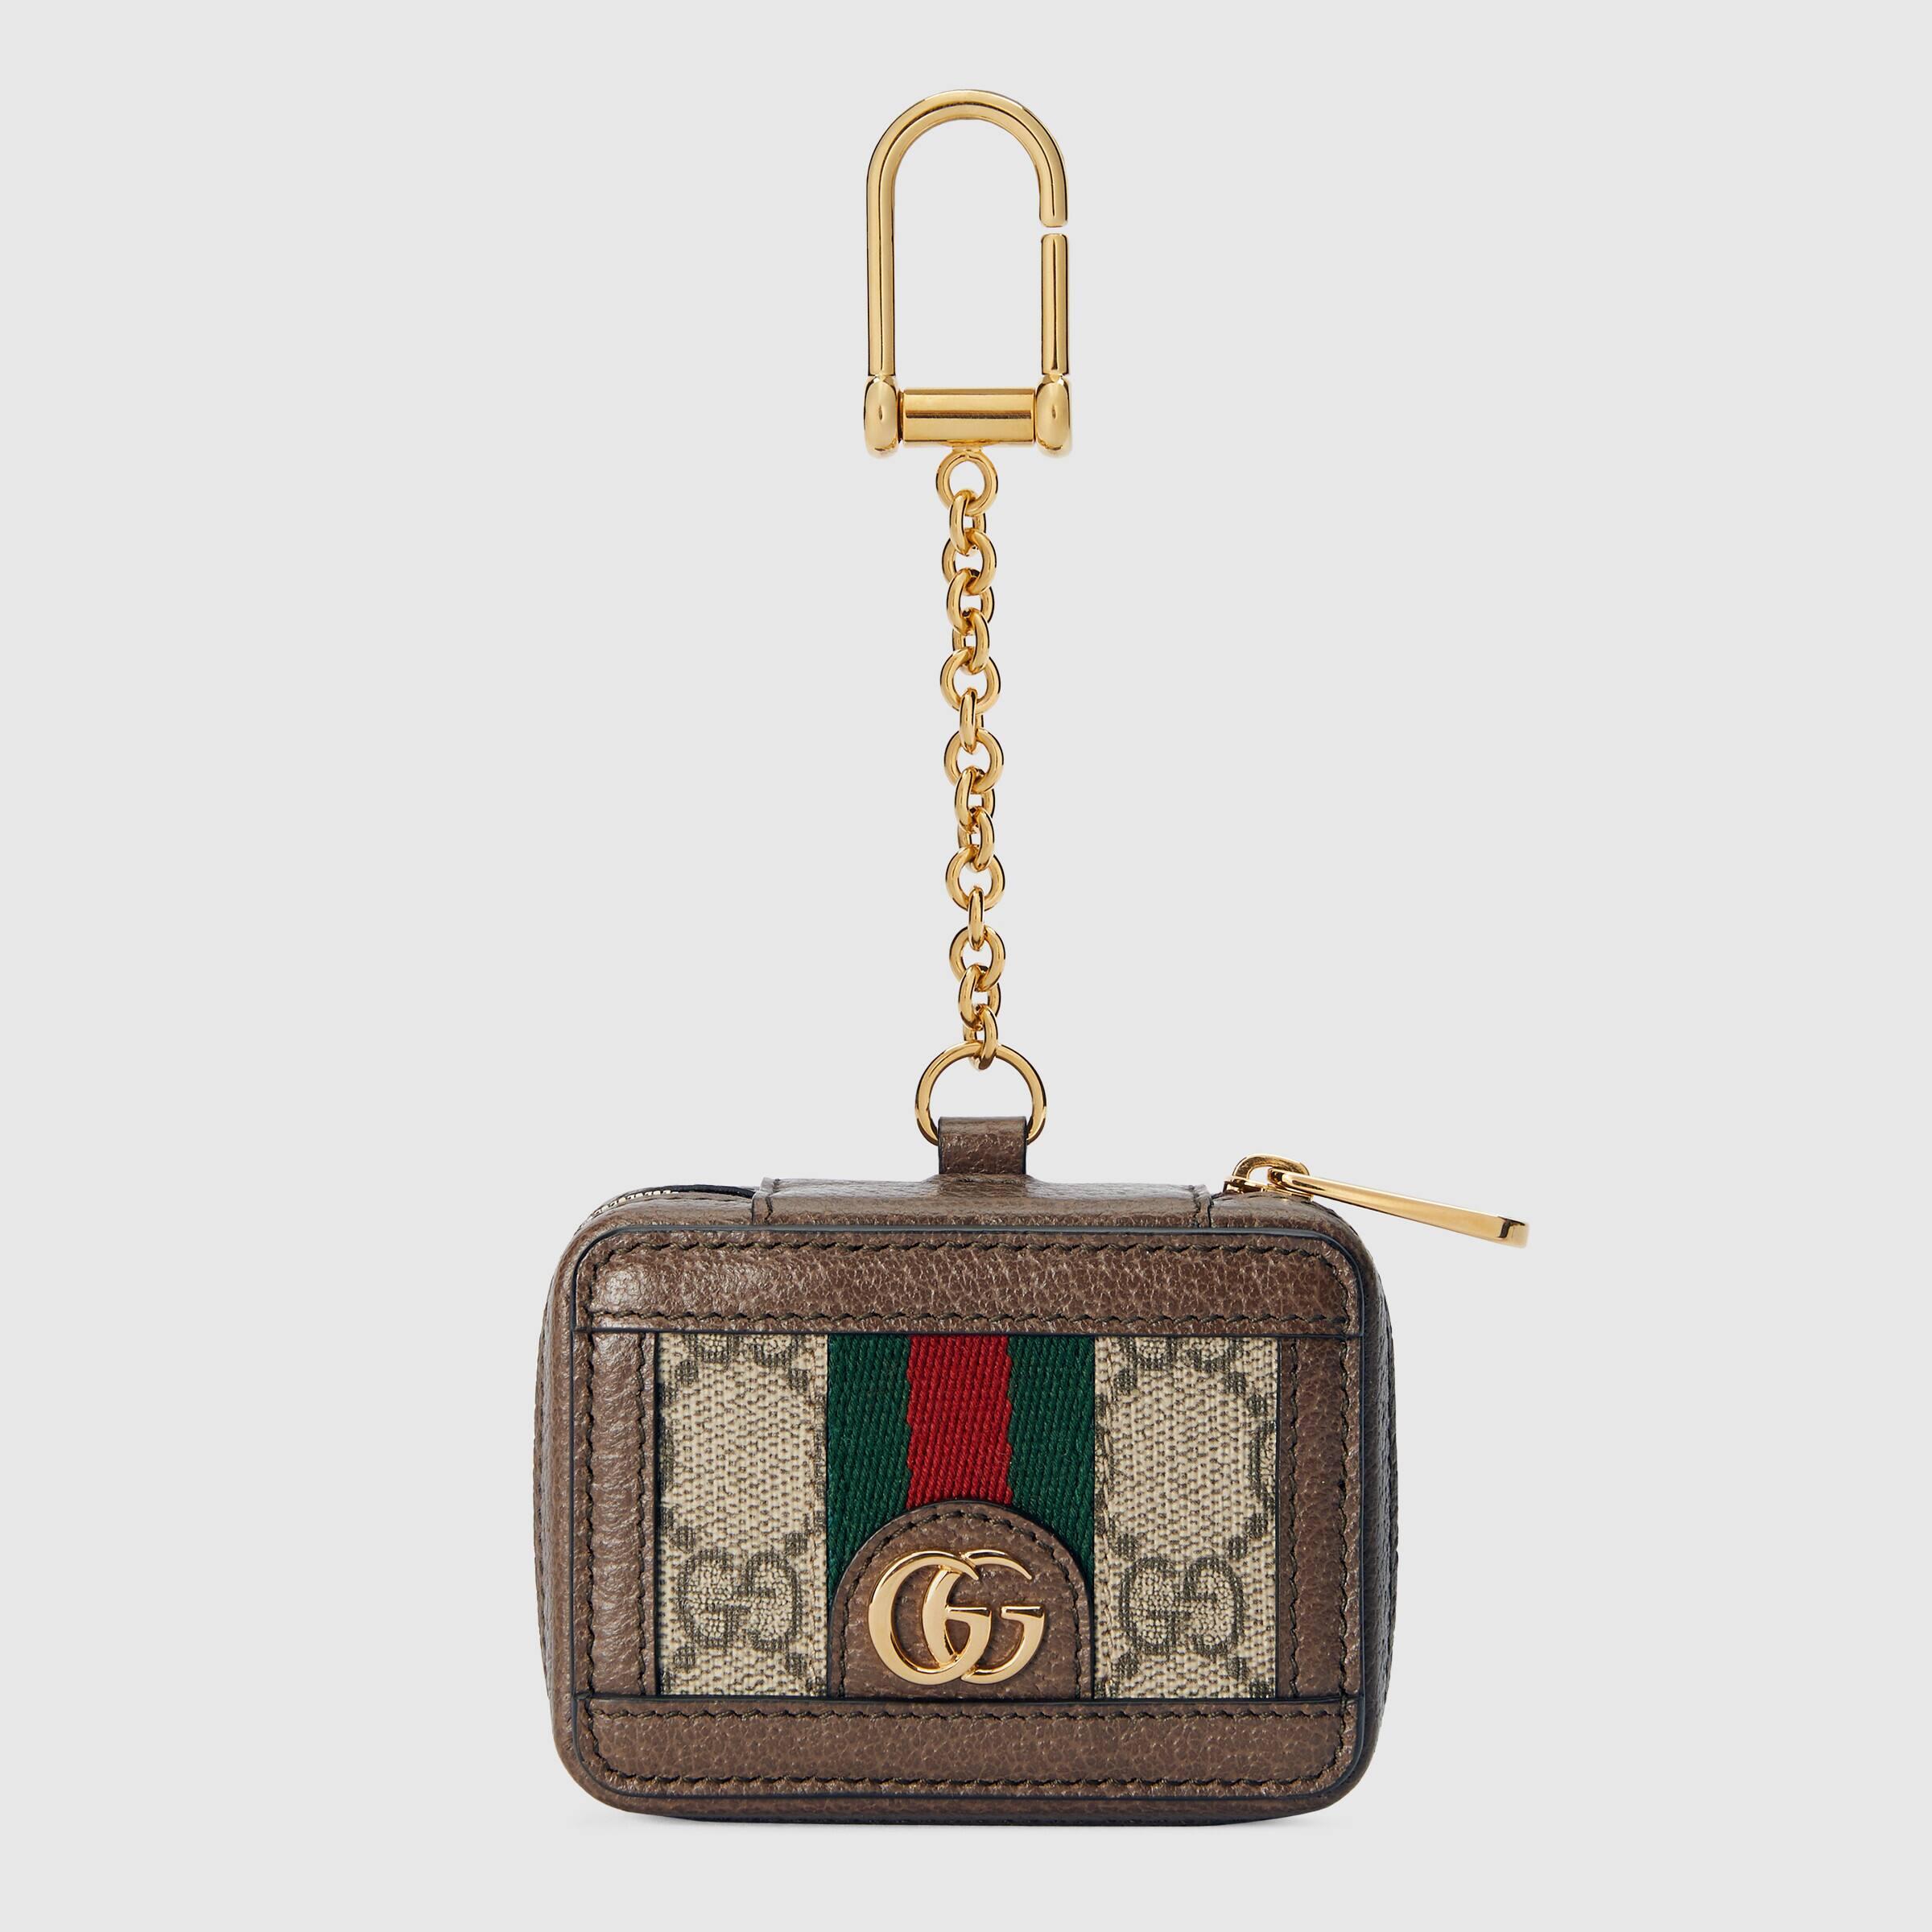 Gucci Coin Purse with Double G Key Chain